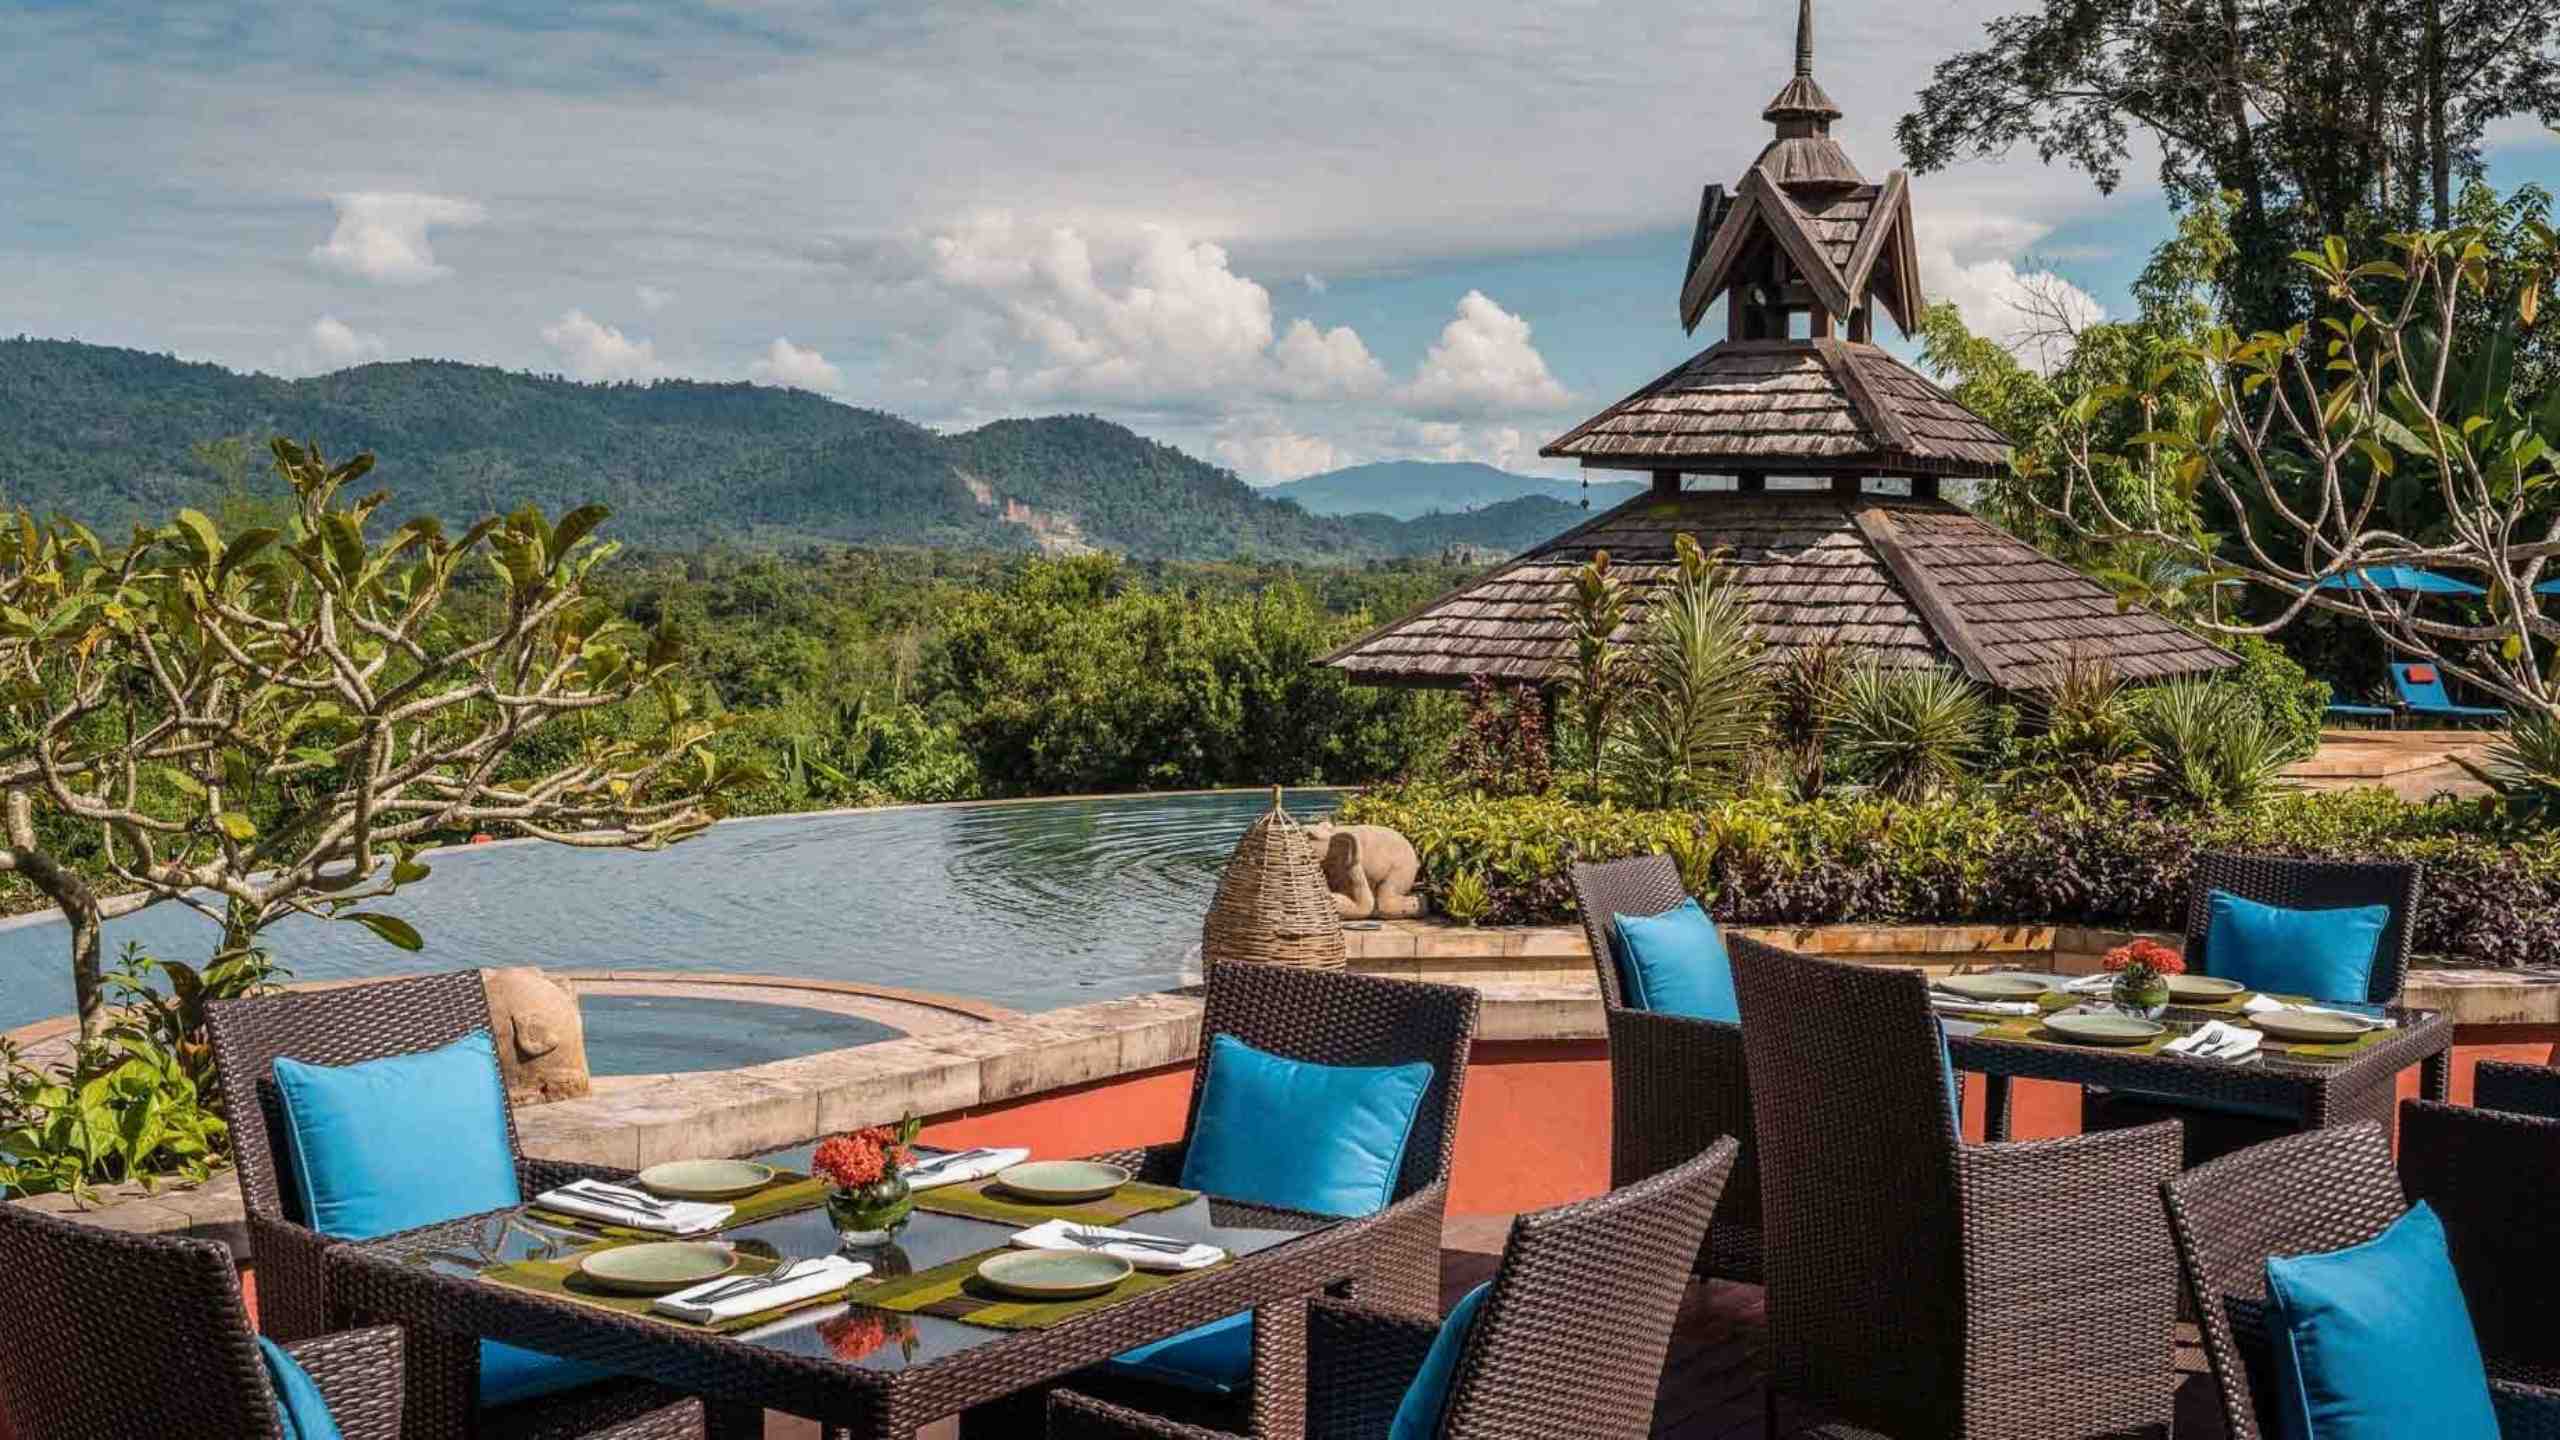 anantara-elephant-camp-thailand-poolside-dining-with-view